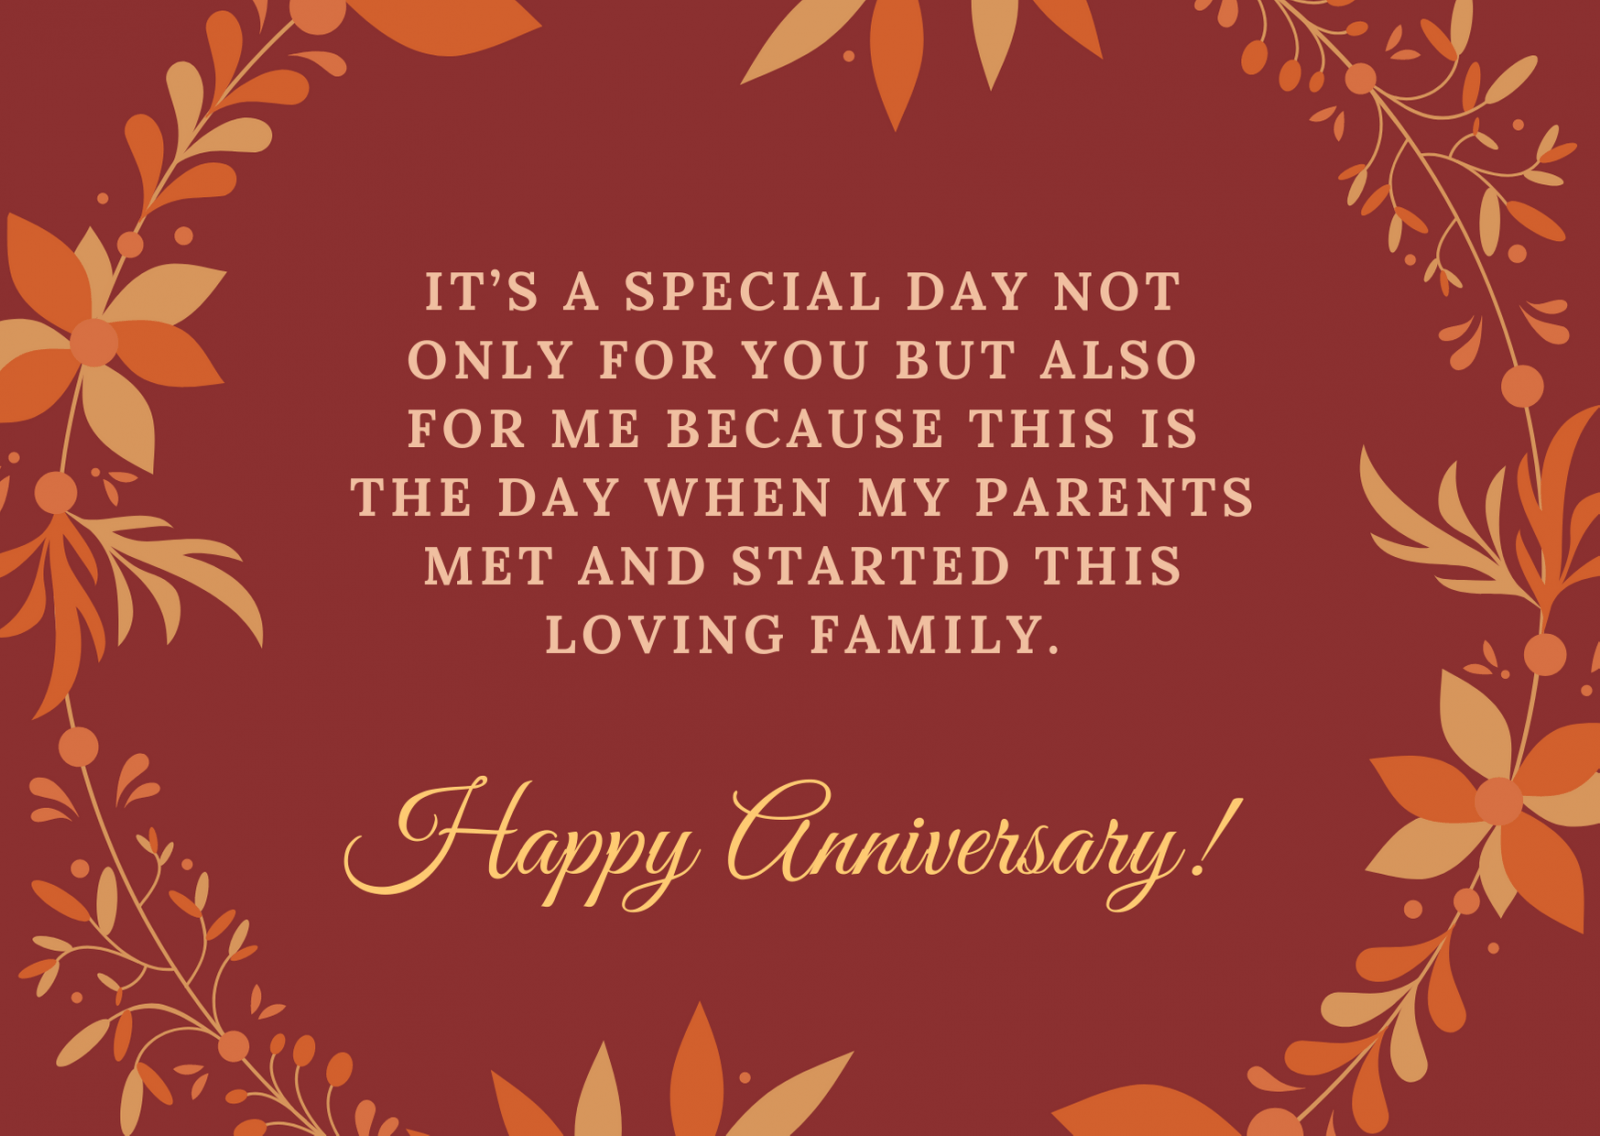 happy anniversary wishes to mom and dad